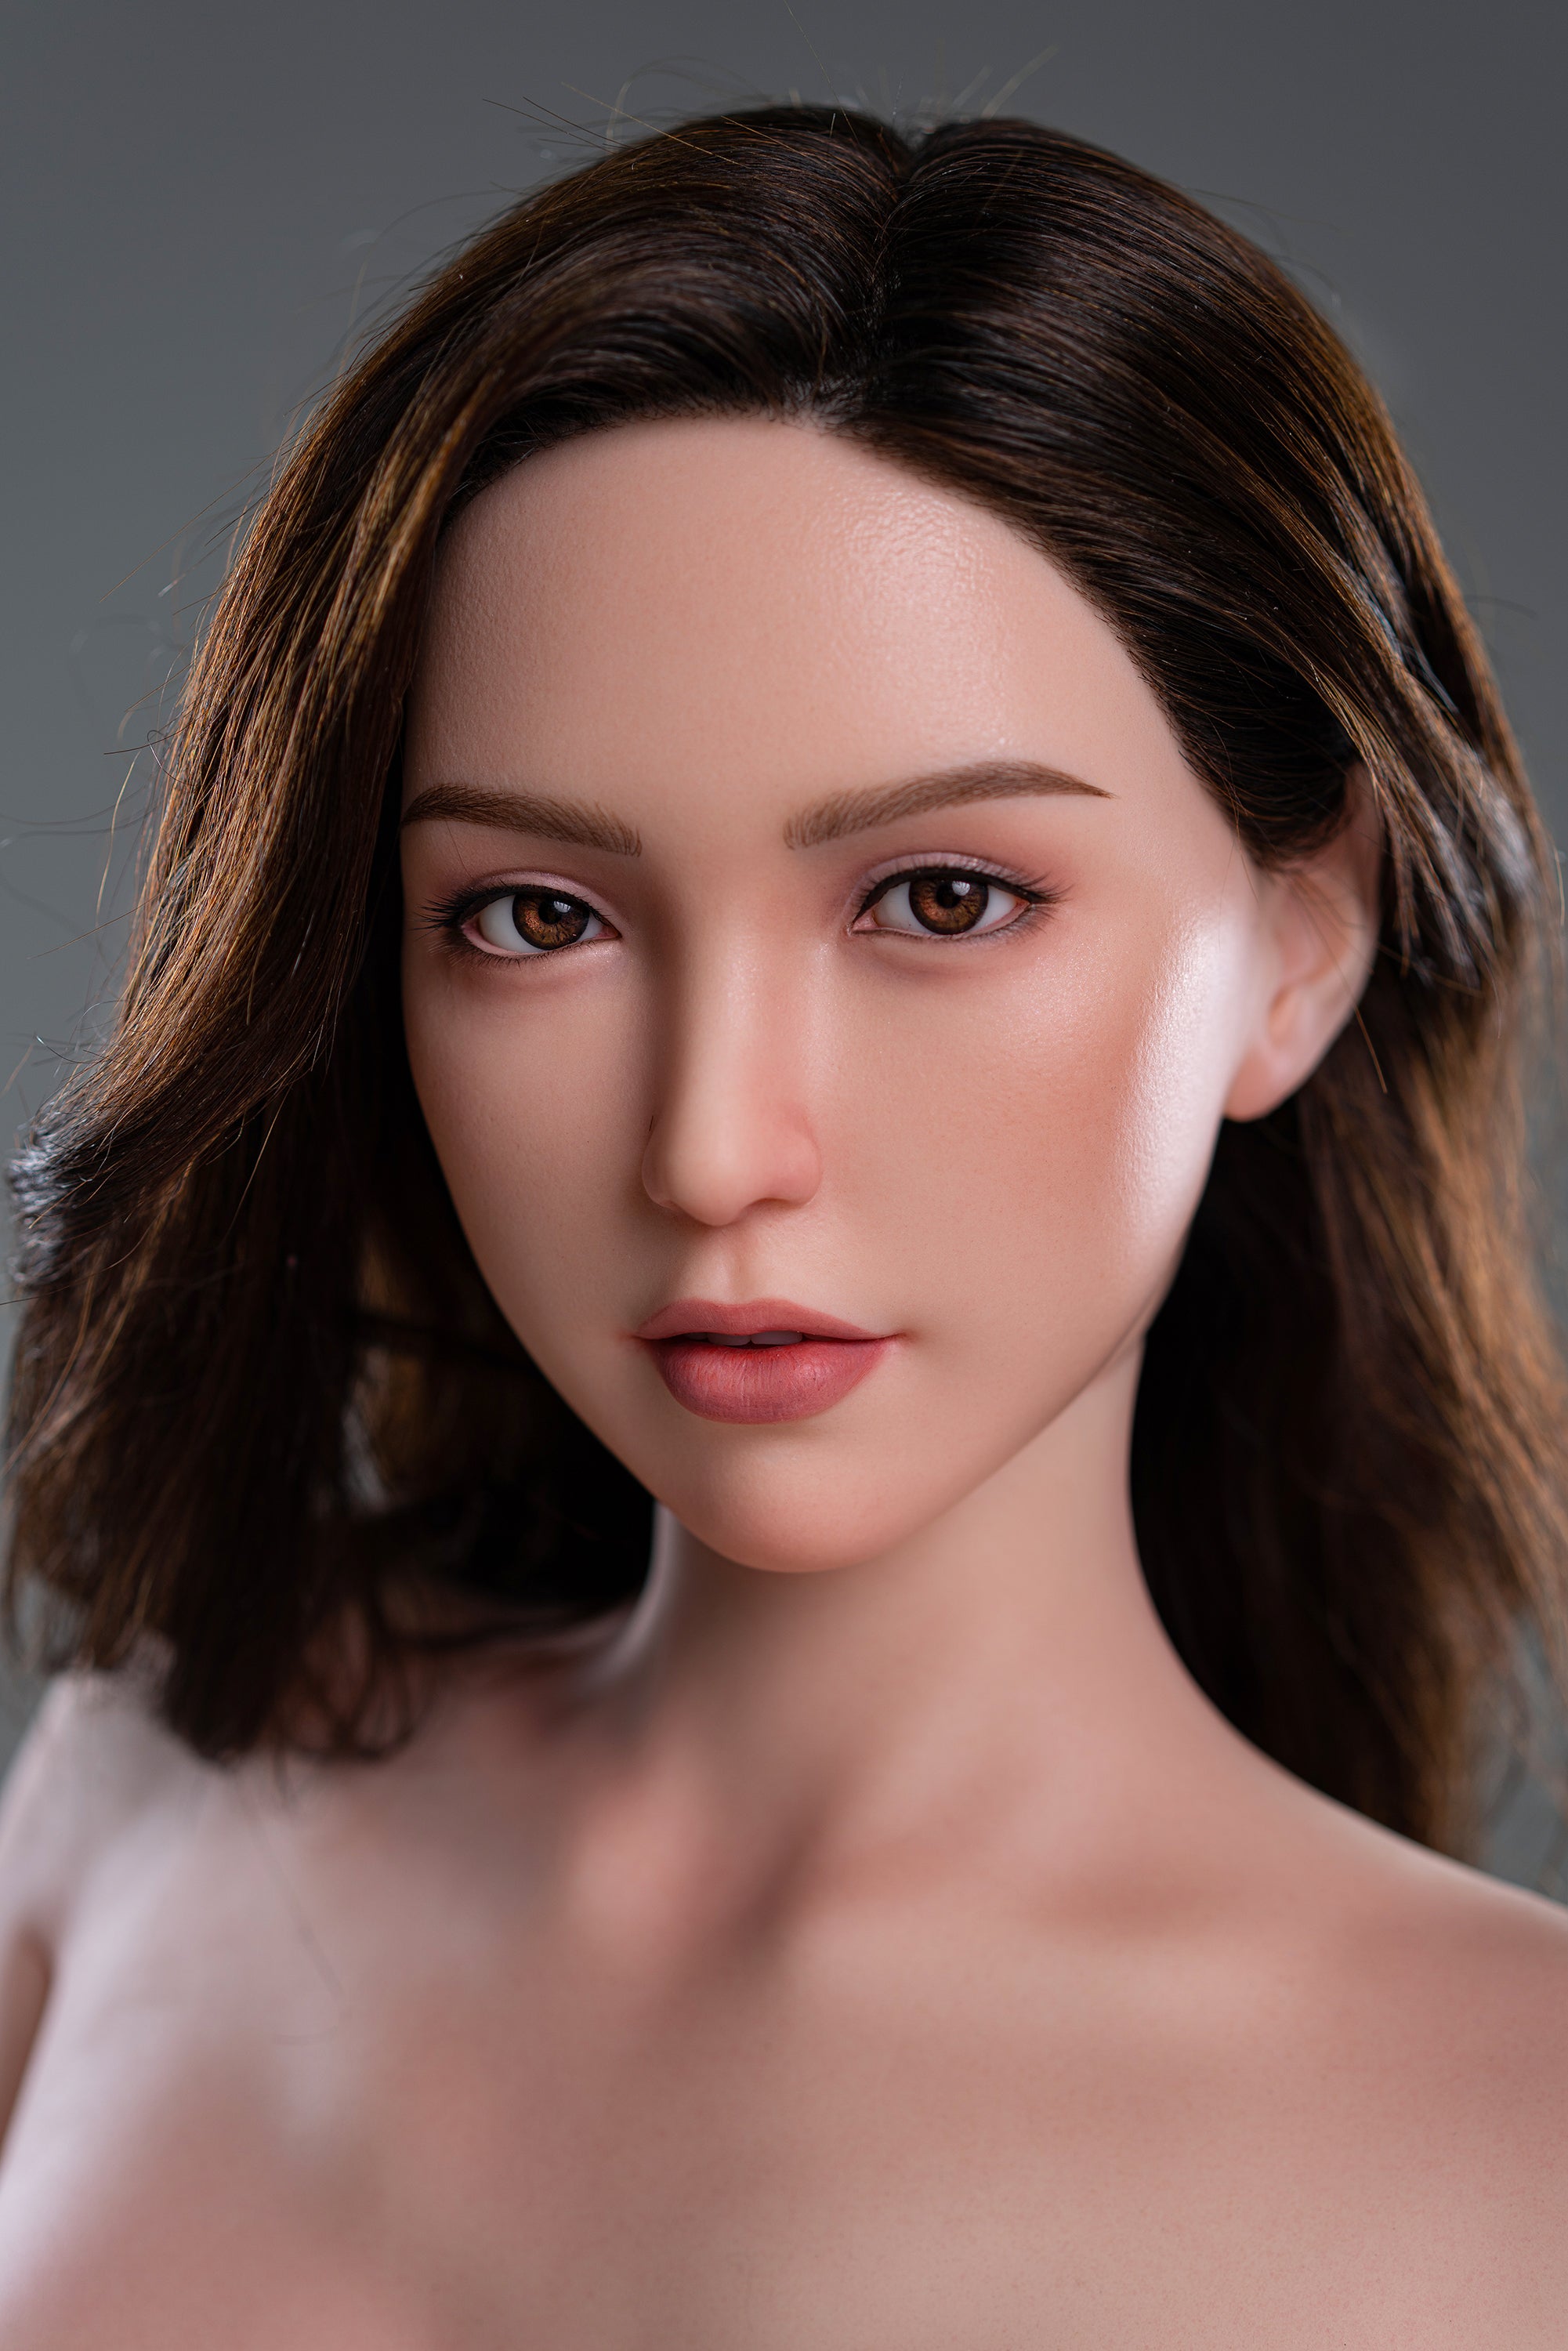 Zelex Doll 170 cm C Silicone - Zelie (CN) | Buy Sex Dolls at DOLLS ACTUALLY